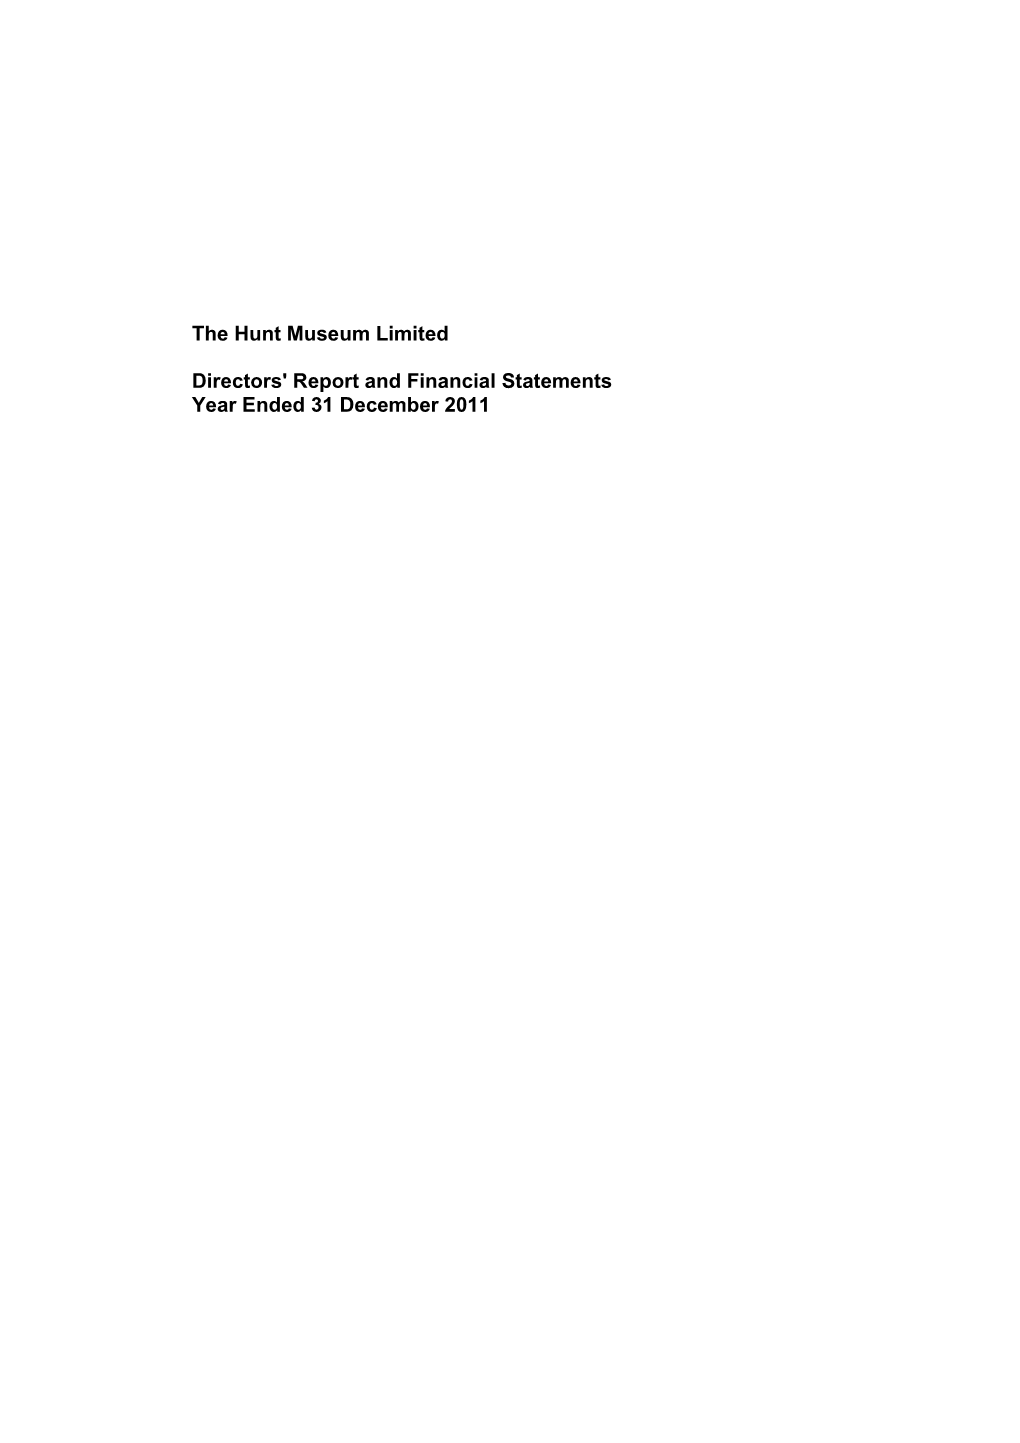 The Hunt Museum Limited Directors' Report and Financial Statements 2011